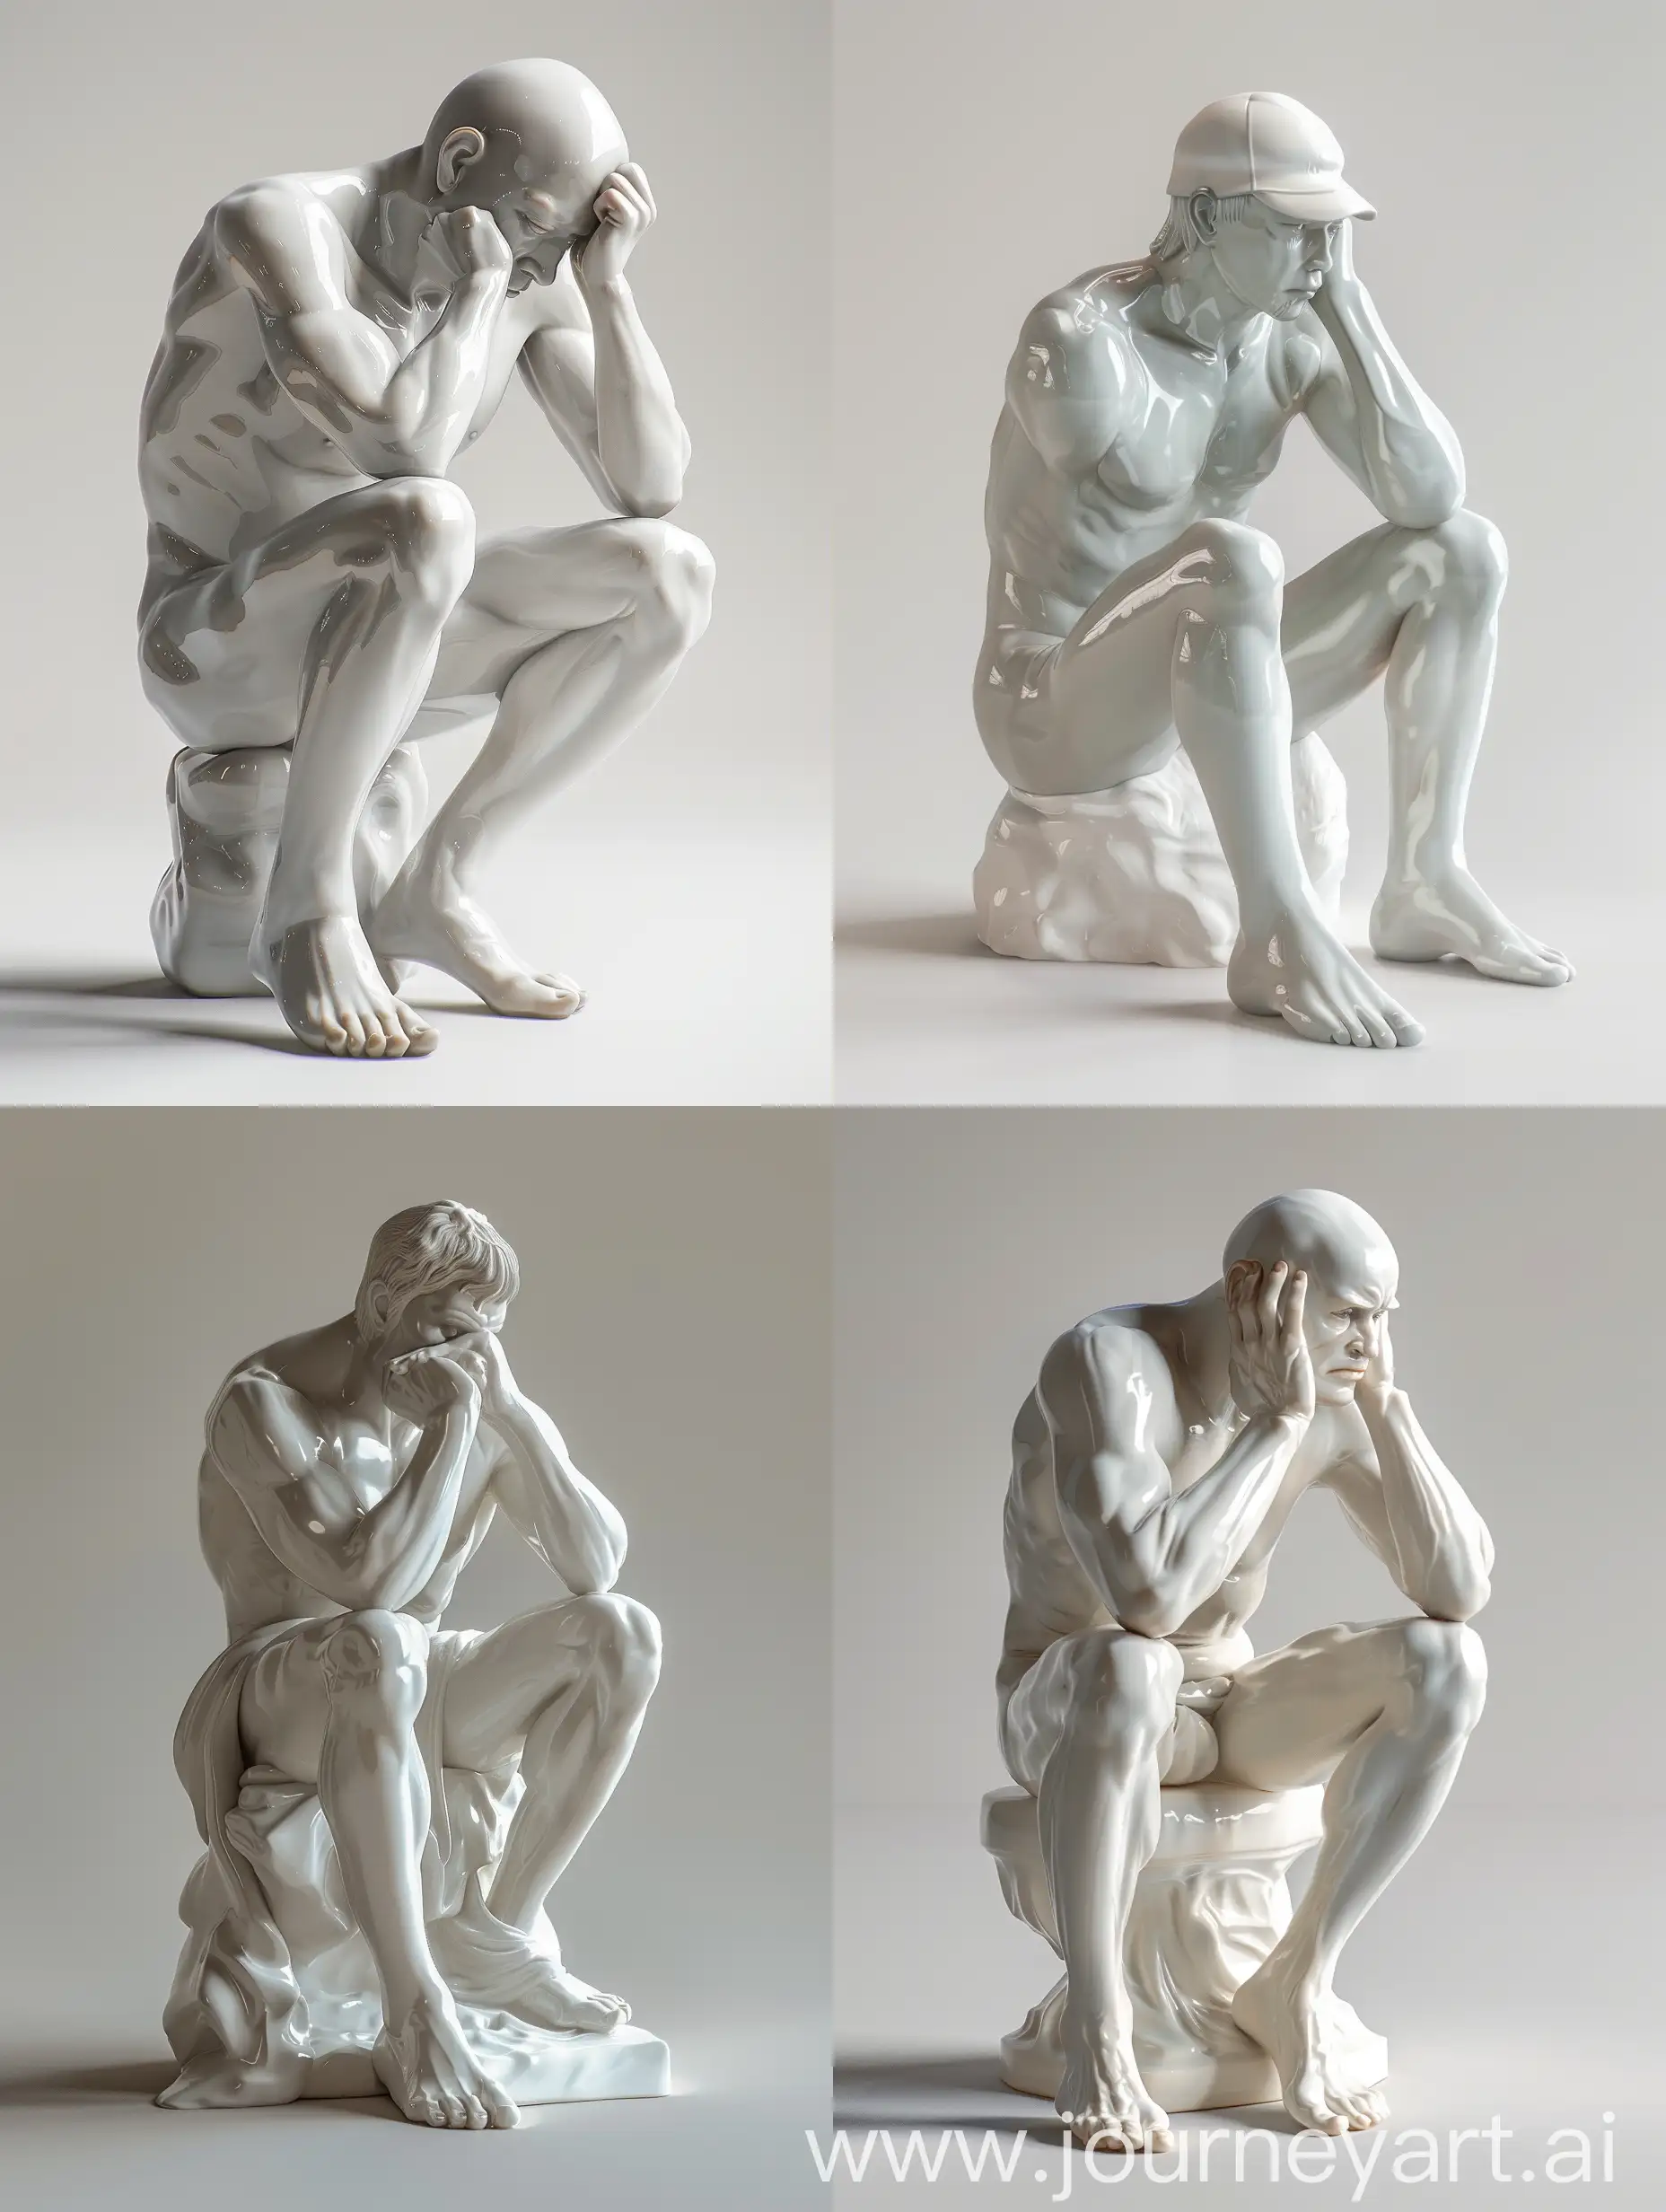 HyperRealistic-3D-Porcelain-Sculpture-of-The-Thinker